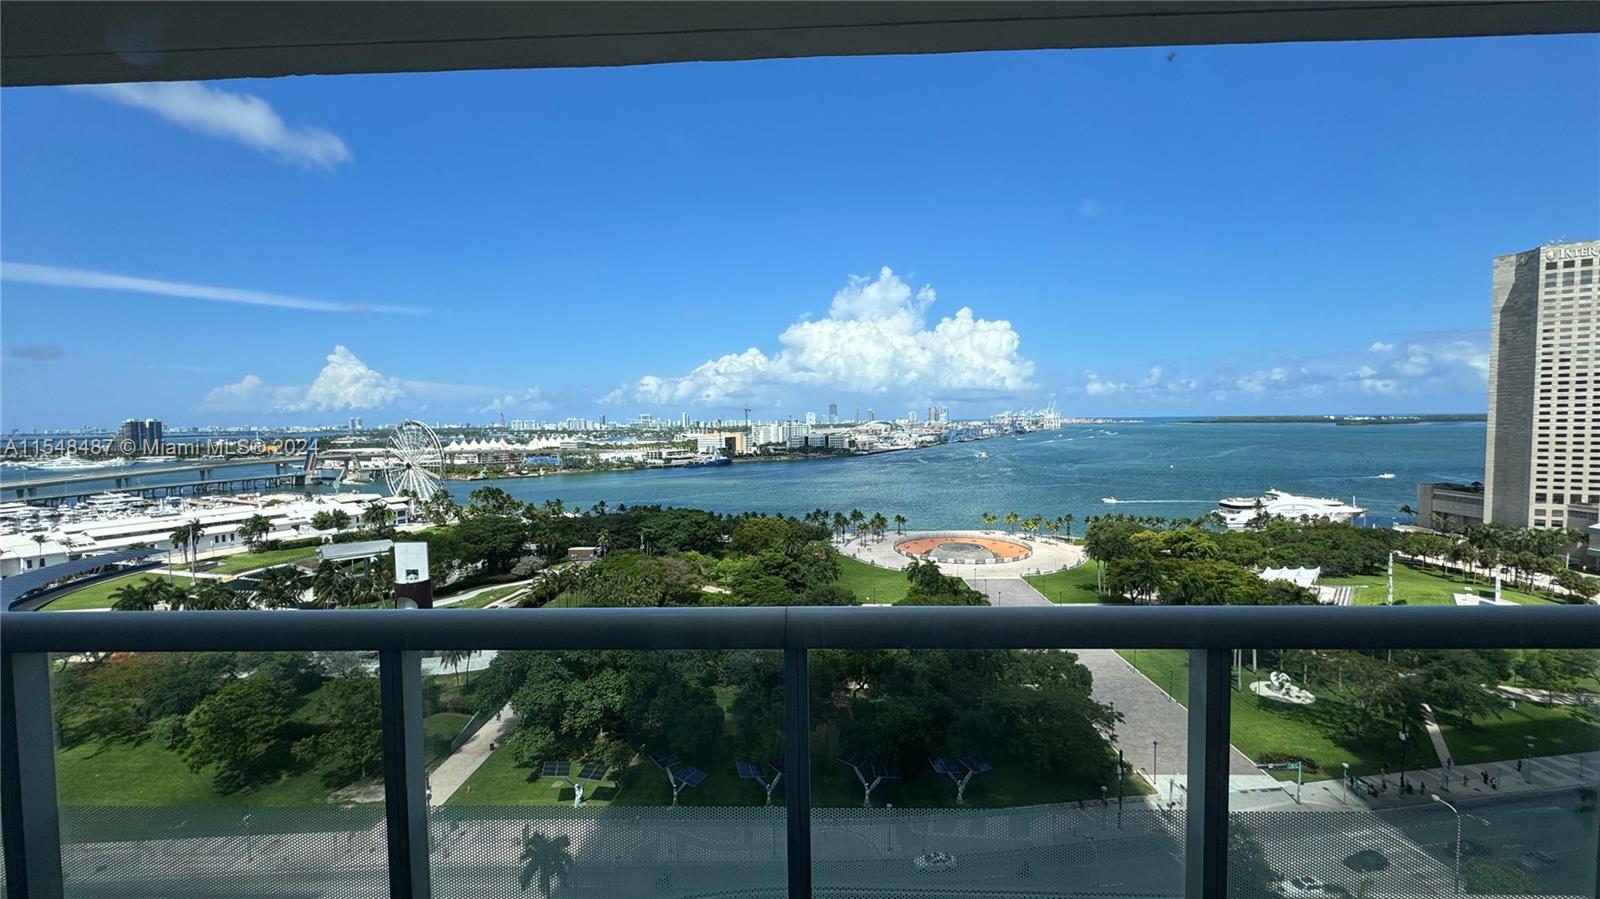 Beautifully FURNISHED 2BR+Den( Converted to a 3rd BD), 2 full Bath 1,322 SF apartment at 50 Biscayne w/direct EAST facing views & floor-to-ceiling windows from every room. Unit features spacious a split floor-plan, large bedrooms both w/ensuite & walk-in closets; open concept kitchen, living/dining rooms. Amenities include: 24-hour concierge, security & valet parking, infinity-edge pool & poolside cabanas, hot tub, formal & informal clubrooms with kitchen, billiards table, wet bar & media center, state-of-the-art fitness center, yoga/pilates room, sauna & steam rooms. Walking distance to Shops at Bayside, AAArena, lots of restaurants, Arsht Center, Whole Foods & Brickell. By car, 50 Biscayne is just 10 min from South Beach, 15 min. from Wynwood,  20 minutes from the Miami Int'l Airport.